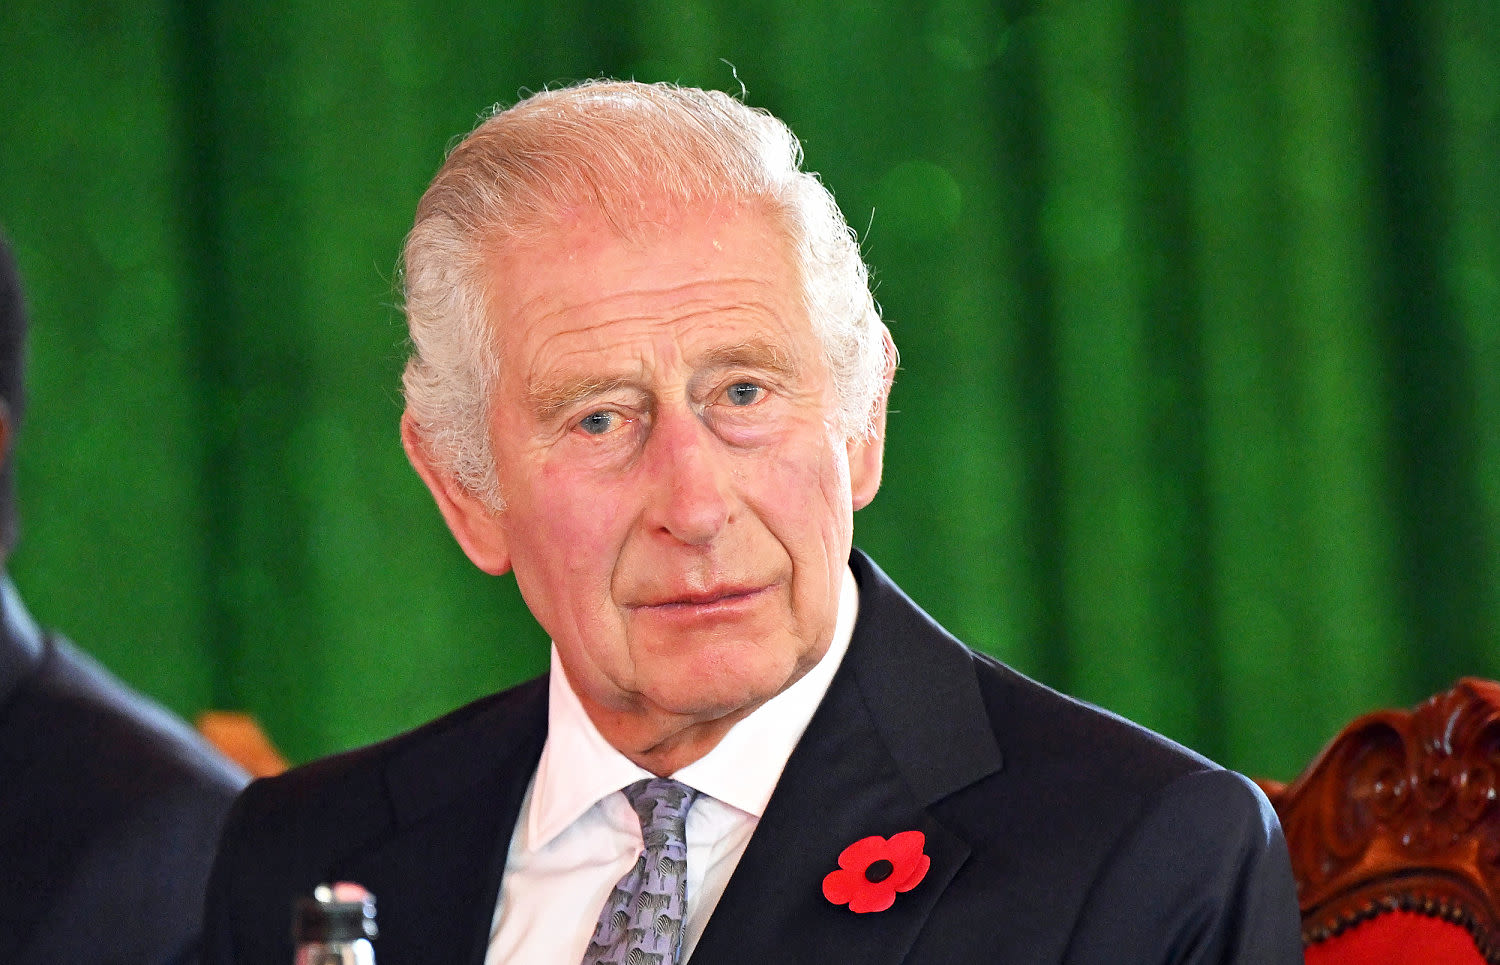 King Charles set to resume public duties amid cancer treatment